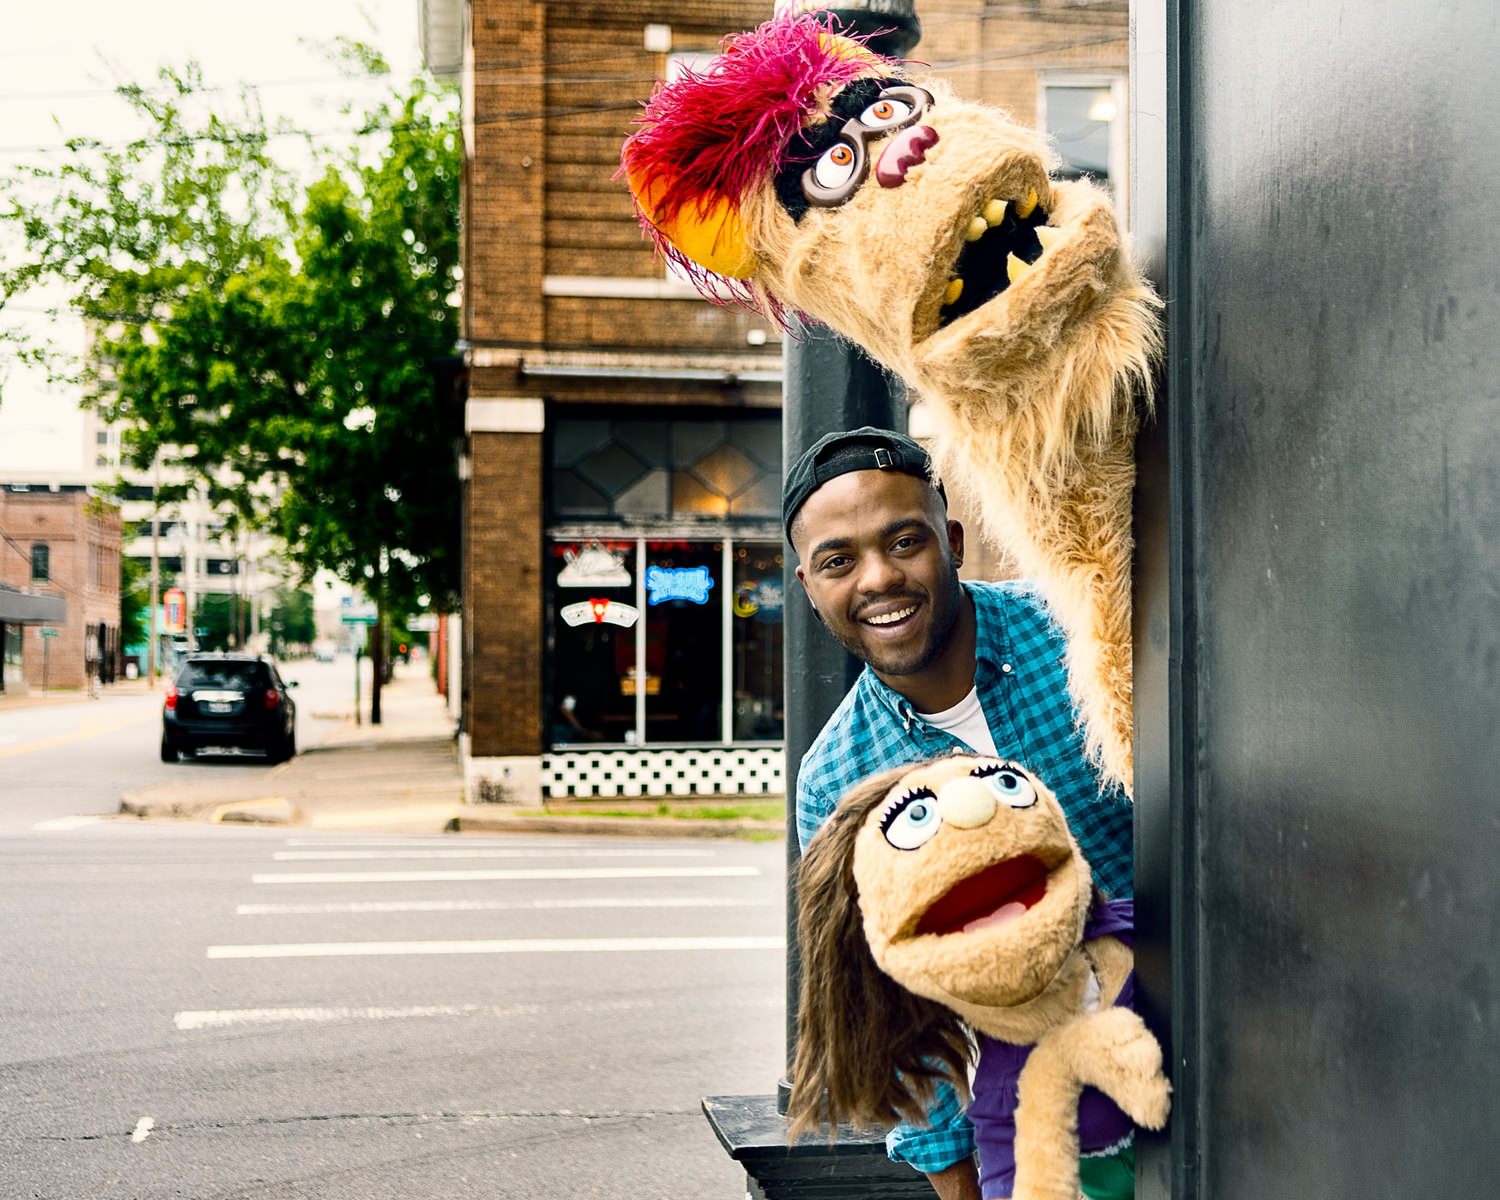 Drew Ellis (Trekkie), Heidi Wallace Leftwich (Kate Monster), and Willie Lucius (Gary Coleman) are part of the cast of Avenue Q, opening June 14 at The Weekend Theater in Little Rock. 2